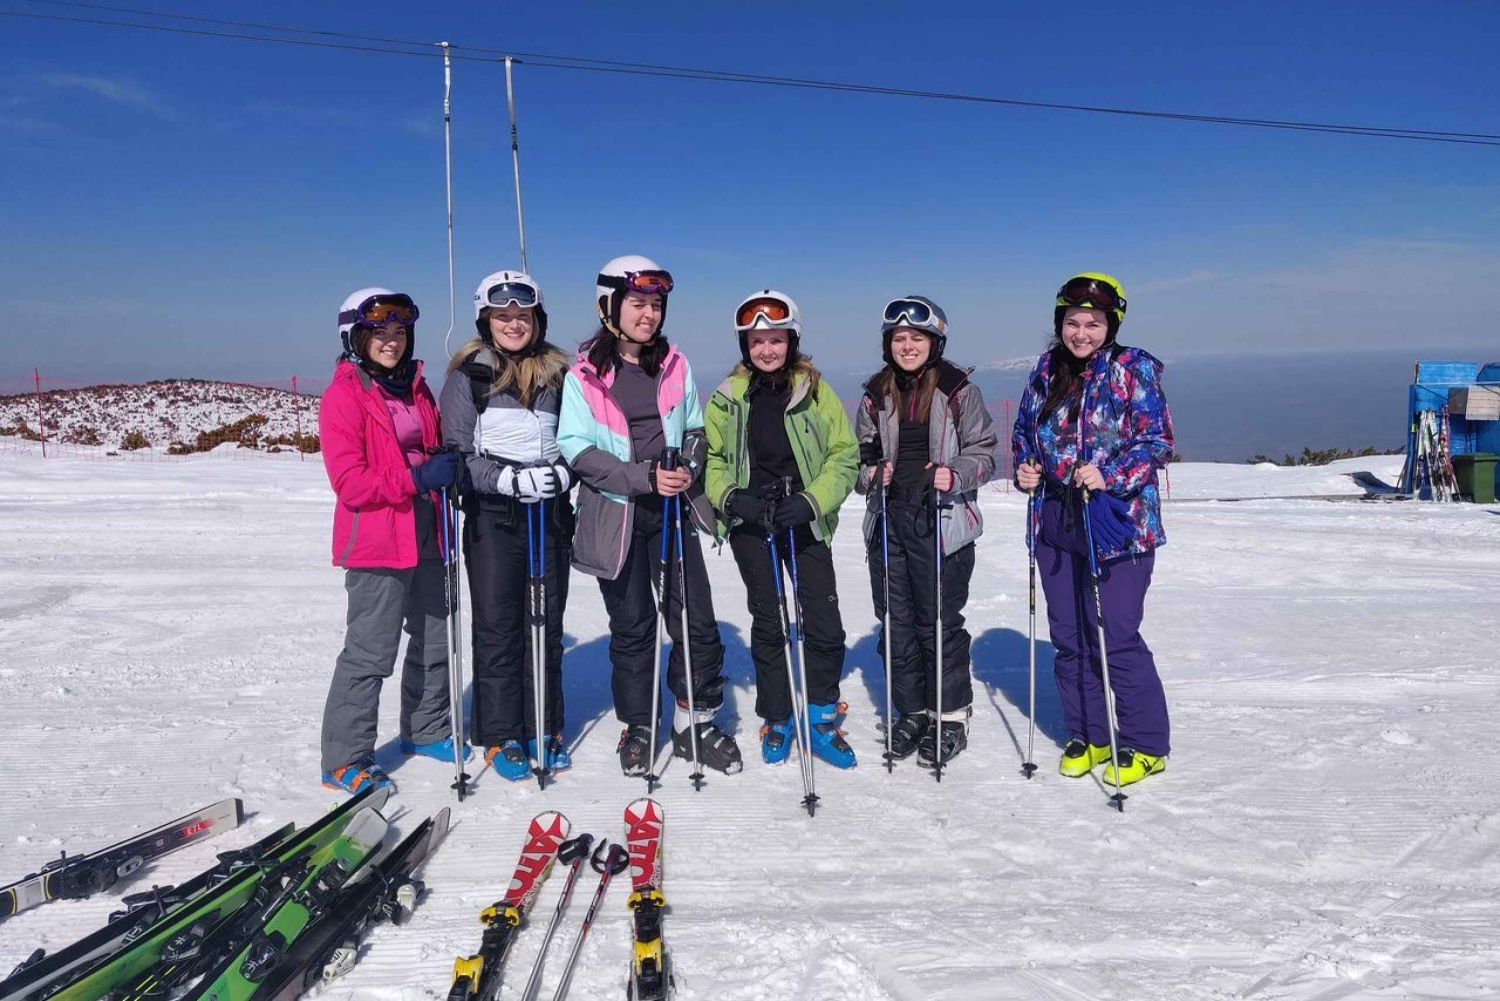 Borovets: Skiing or Snowboarding Group Lesson for All Levels